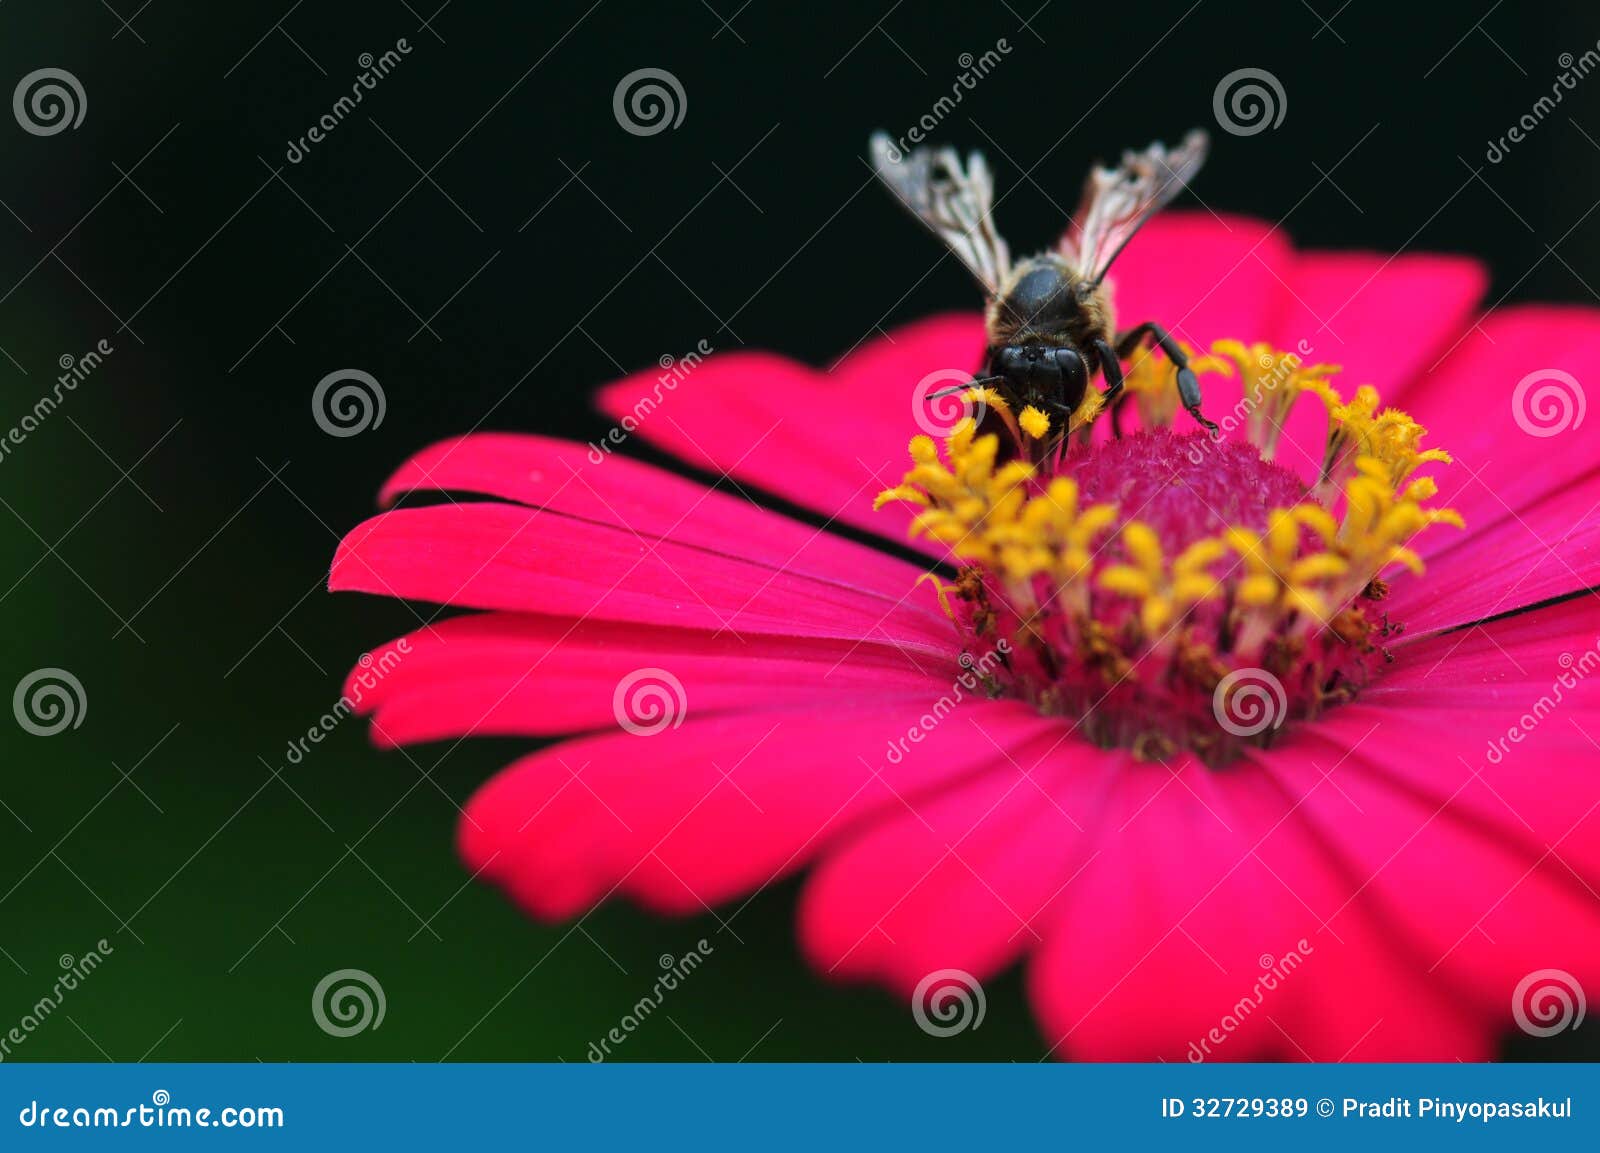 bumble bee gathering polen from zinnia